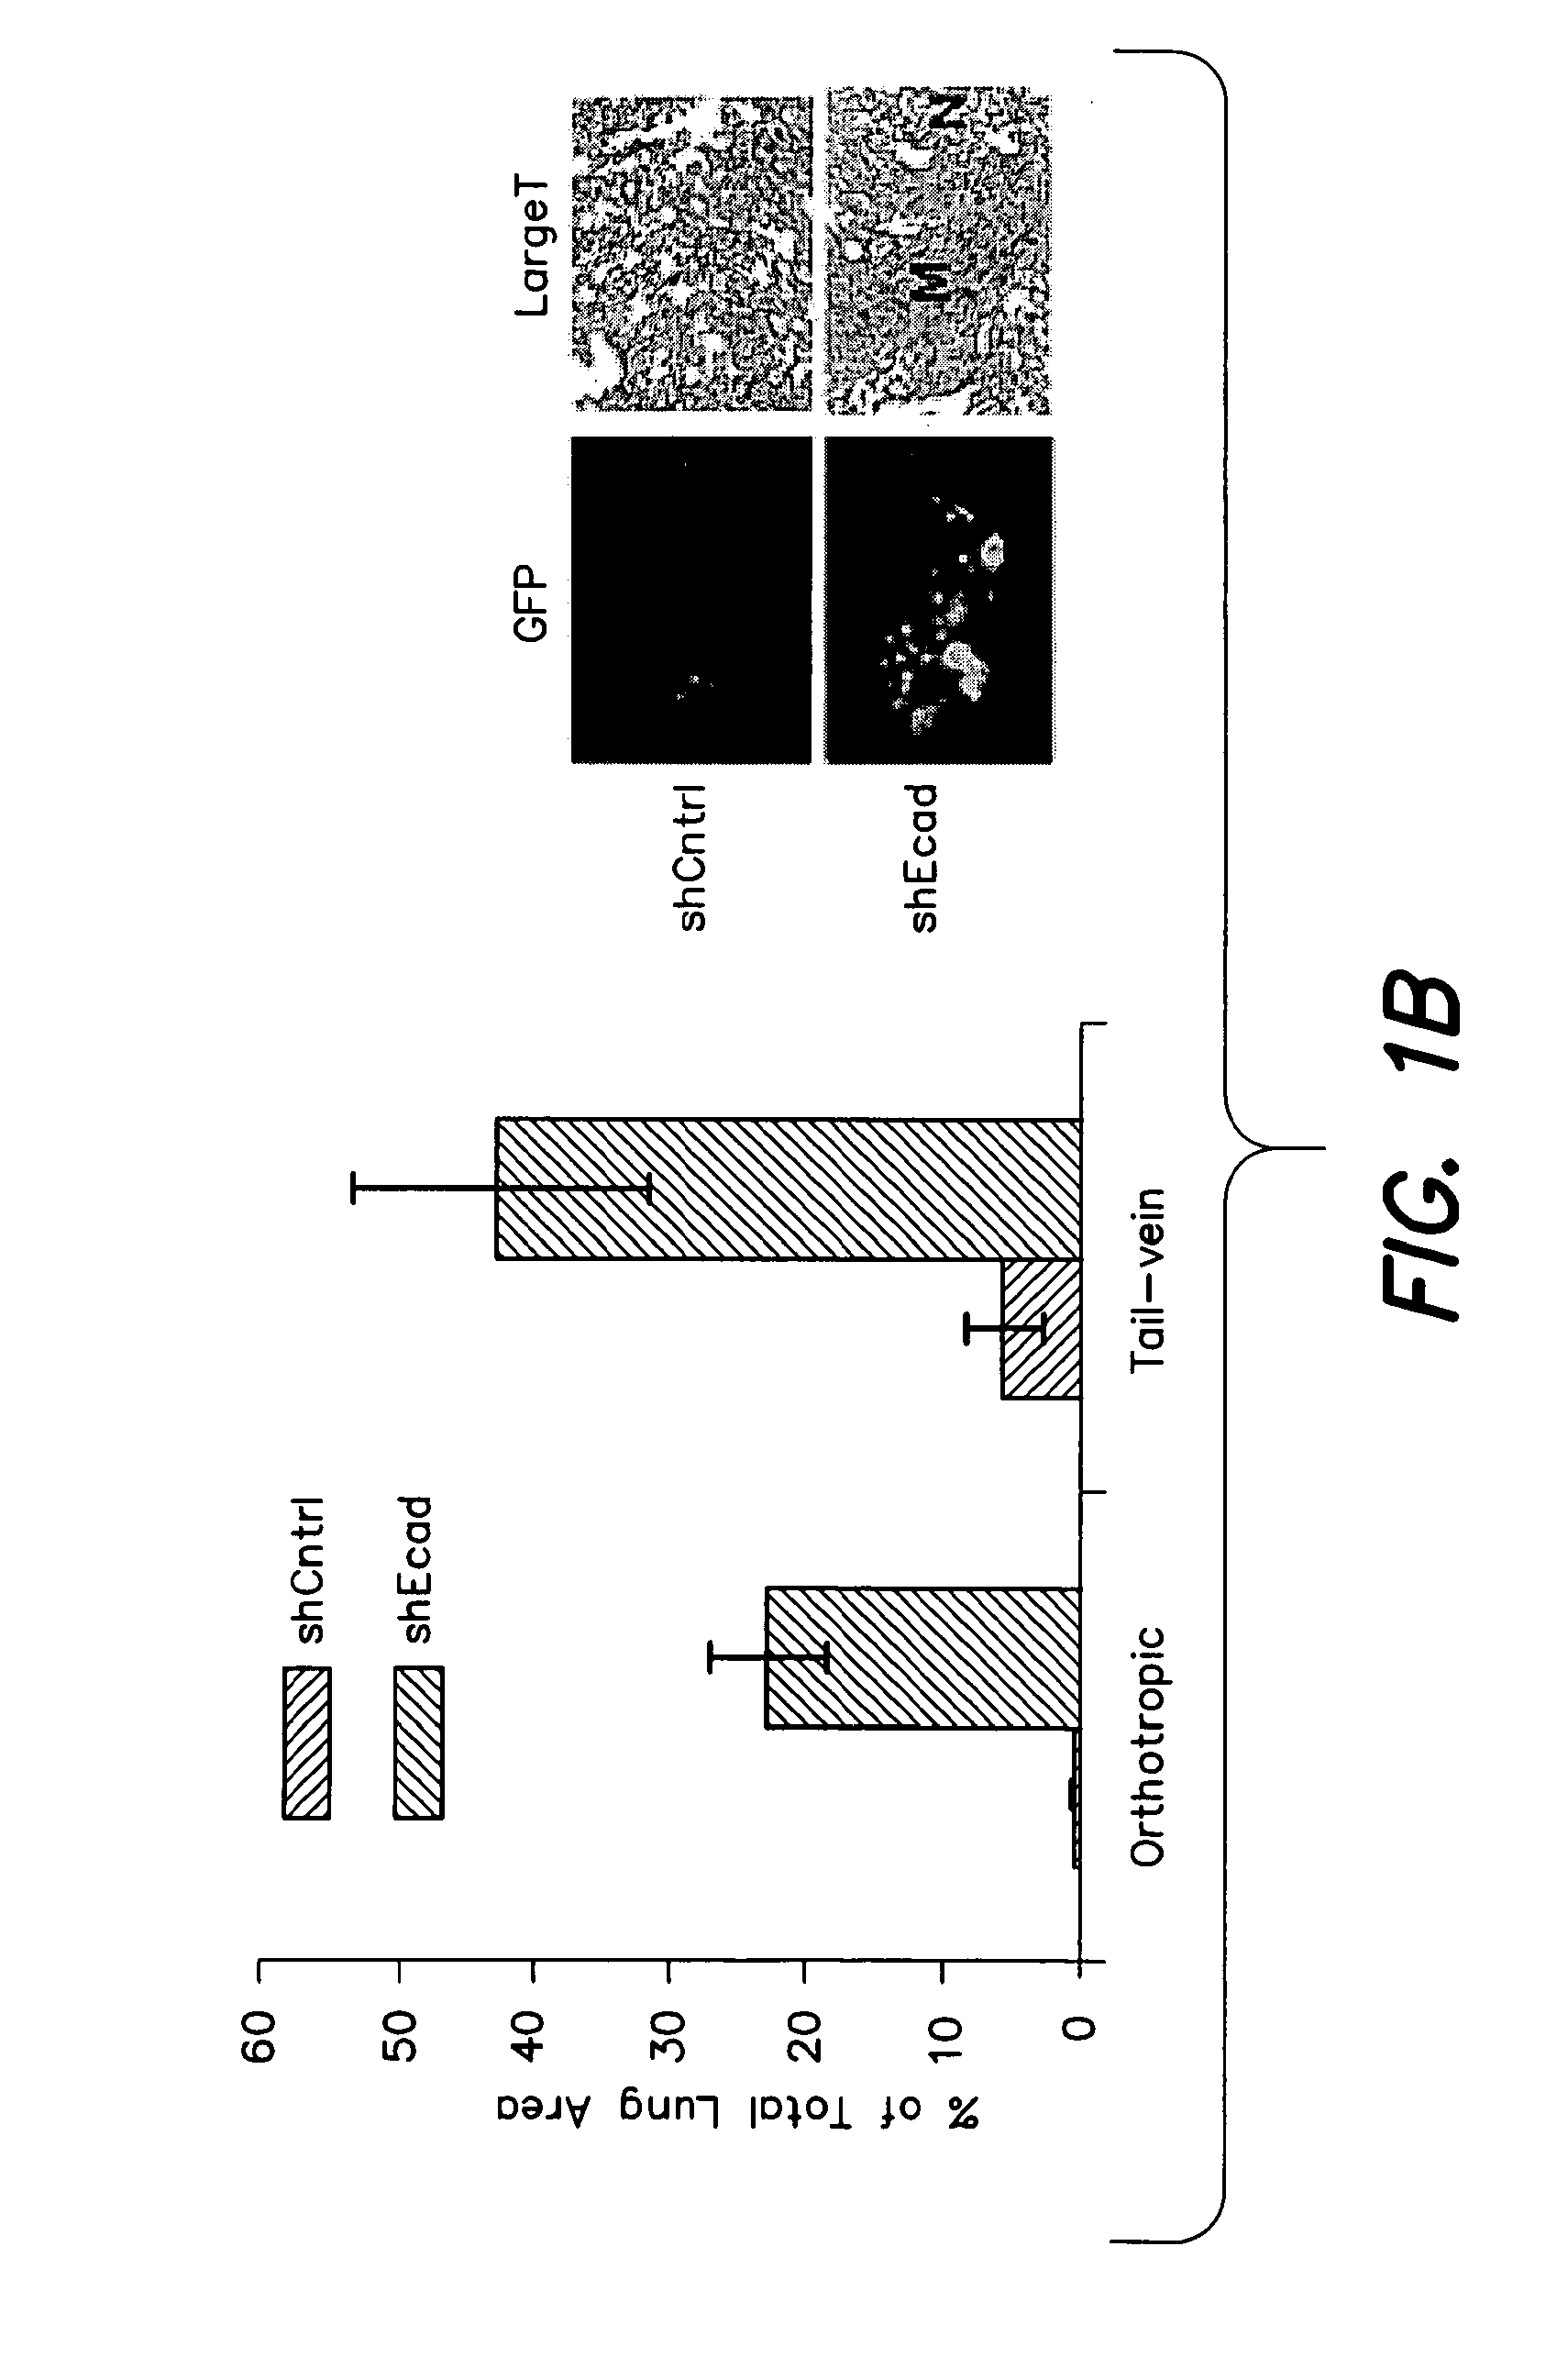 Methods for identification and use of agents targeting cancer stem cells